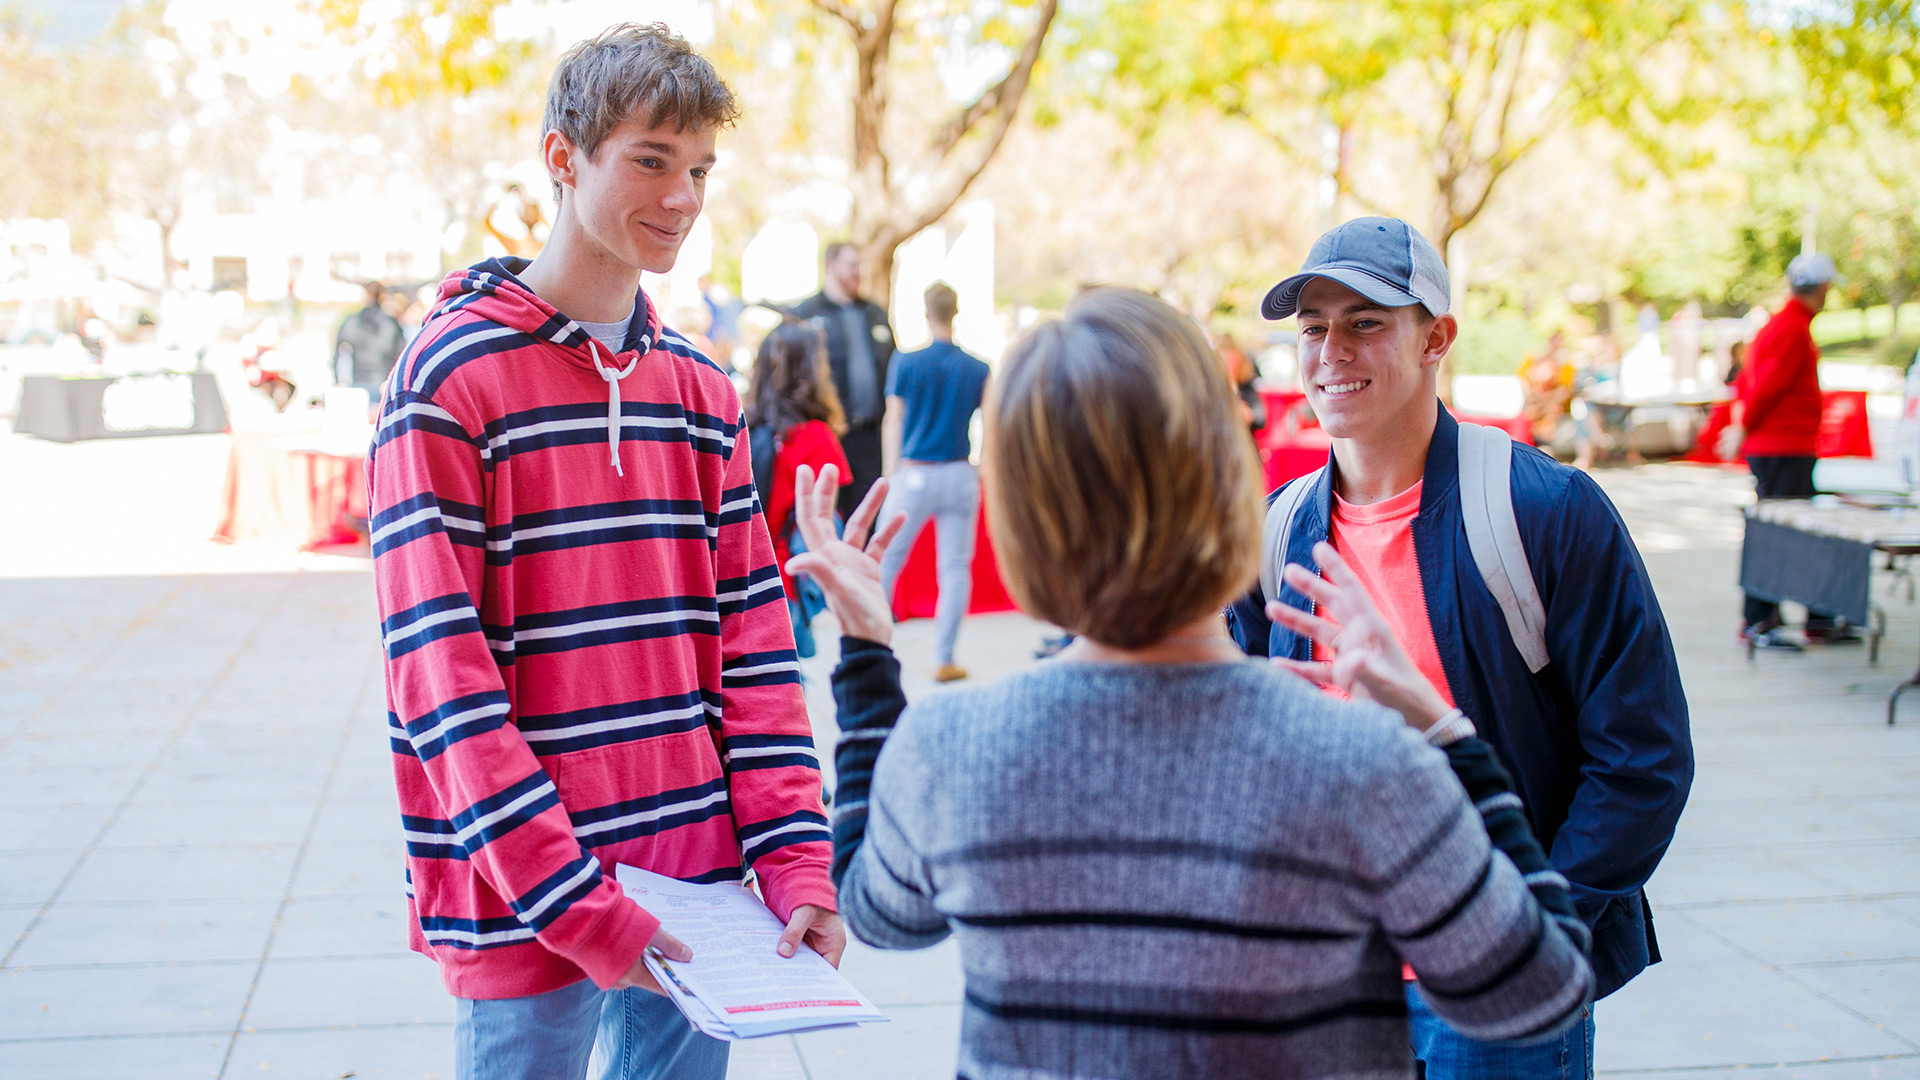 Two students talking to a vendor at a fair